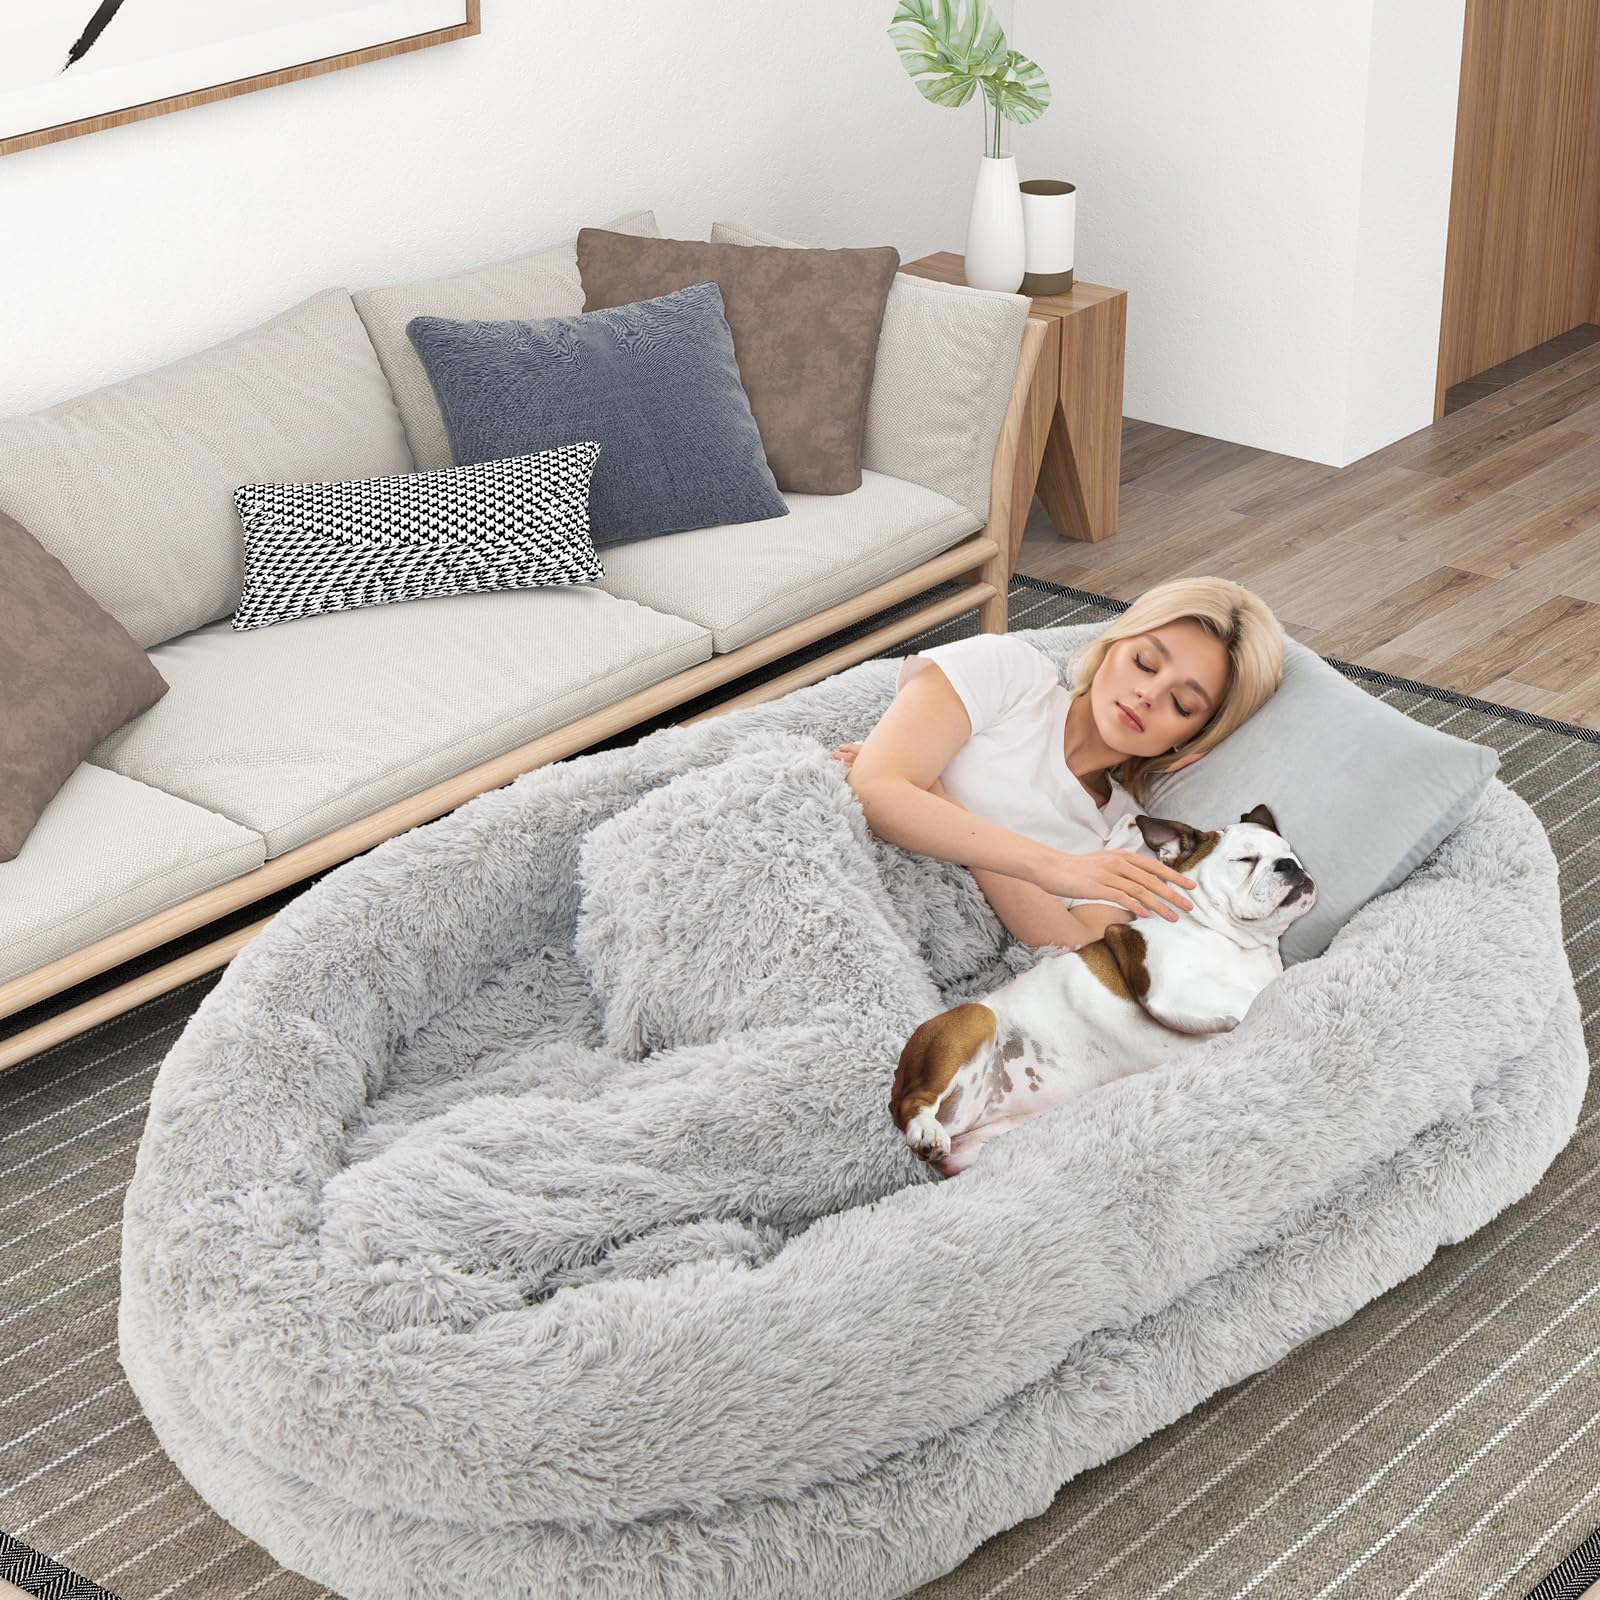 Giantex Human Dog Bed - 71" x 45" Large Human Size Dog Bed for Adult